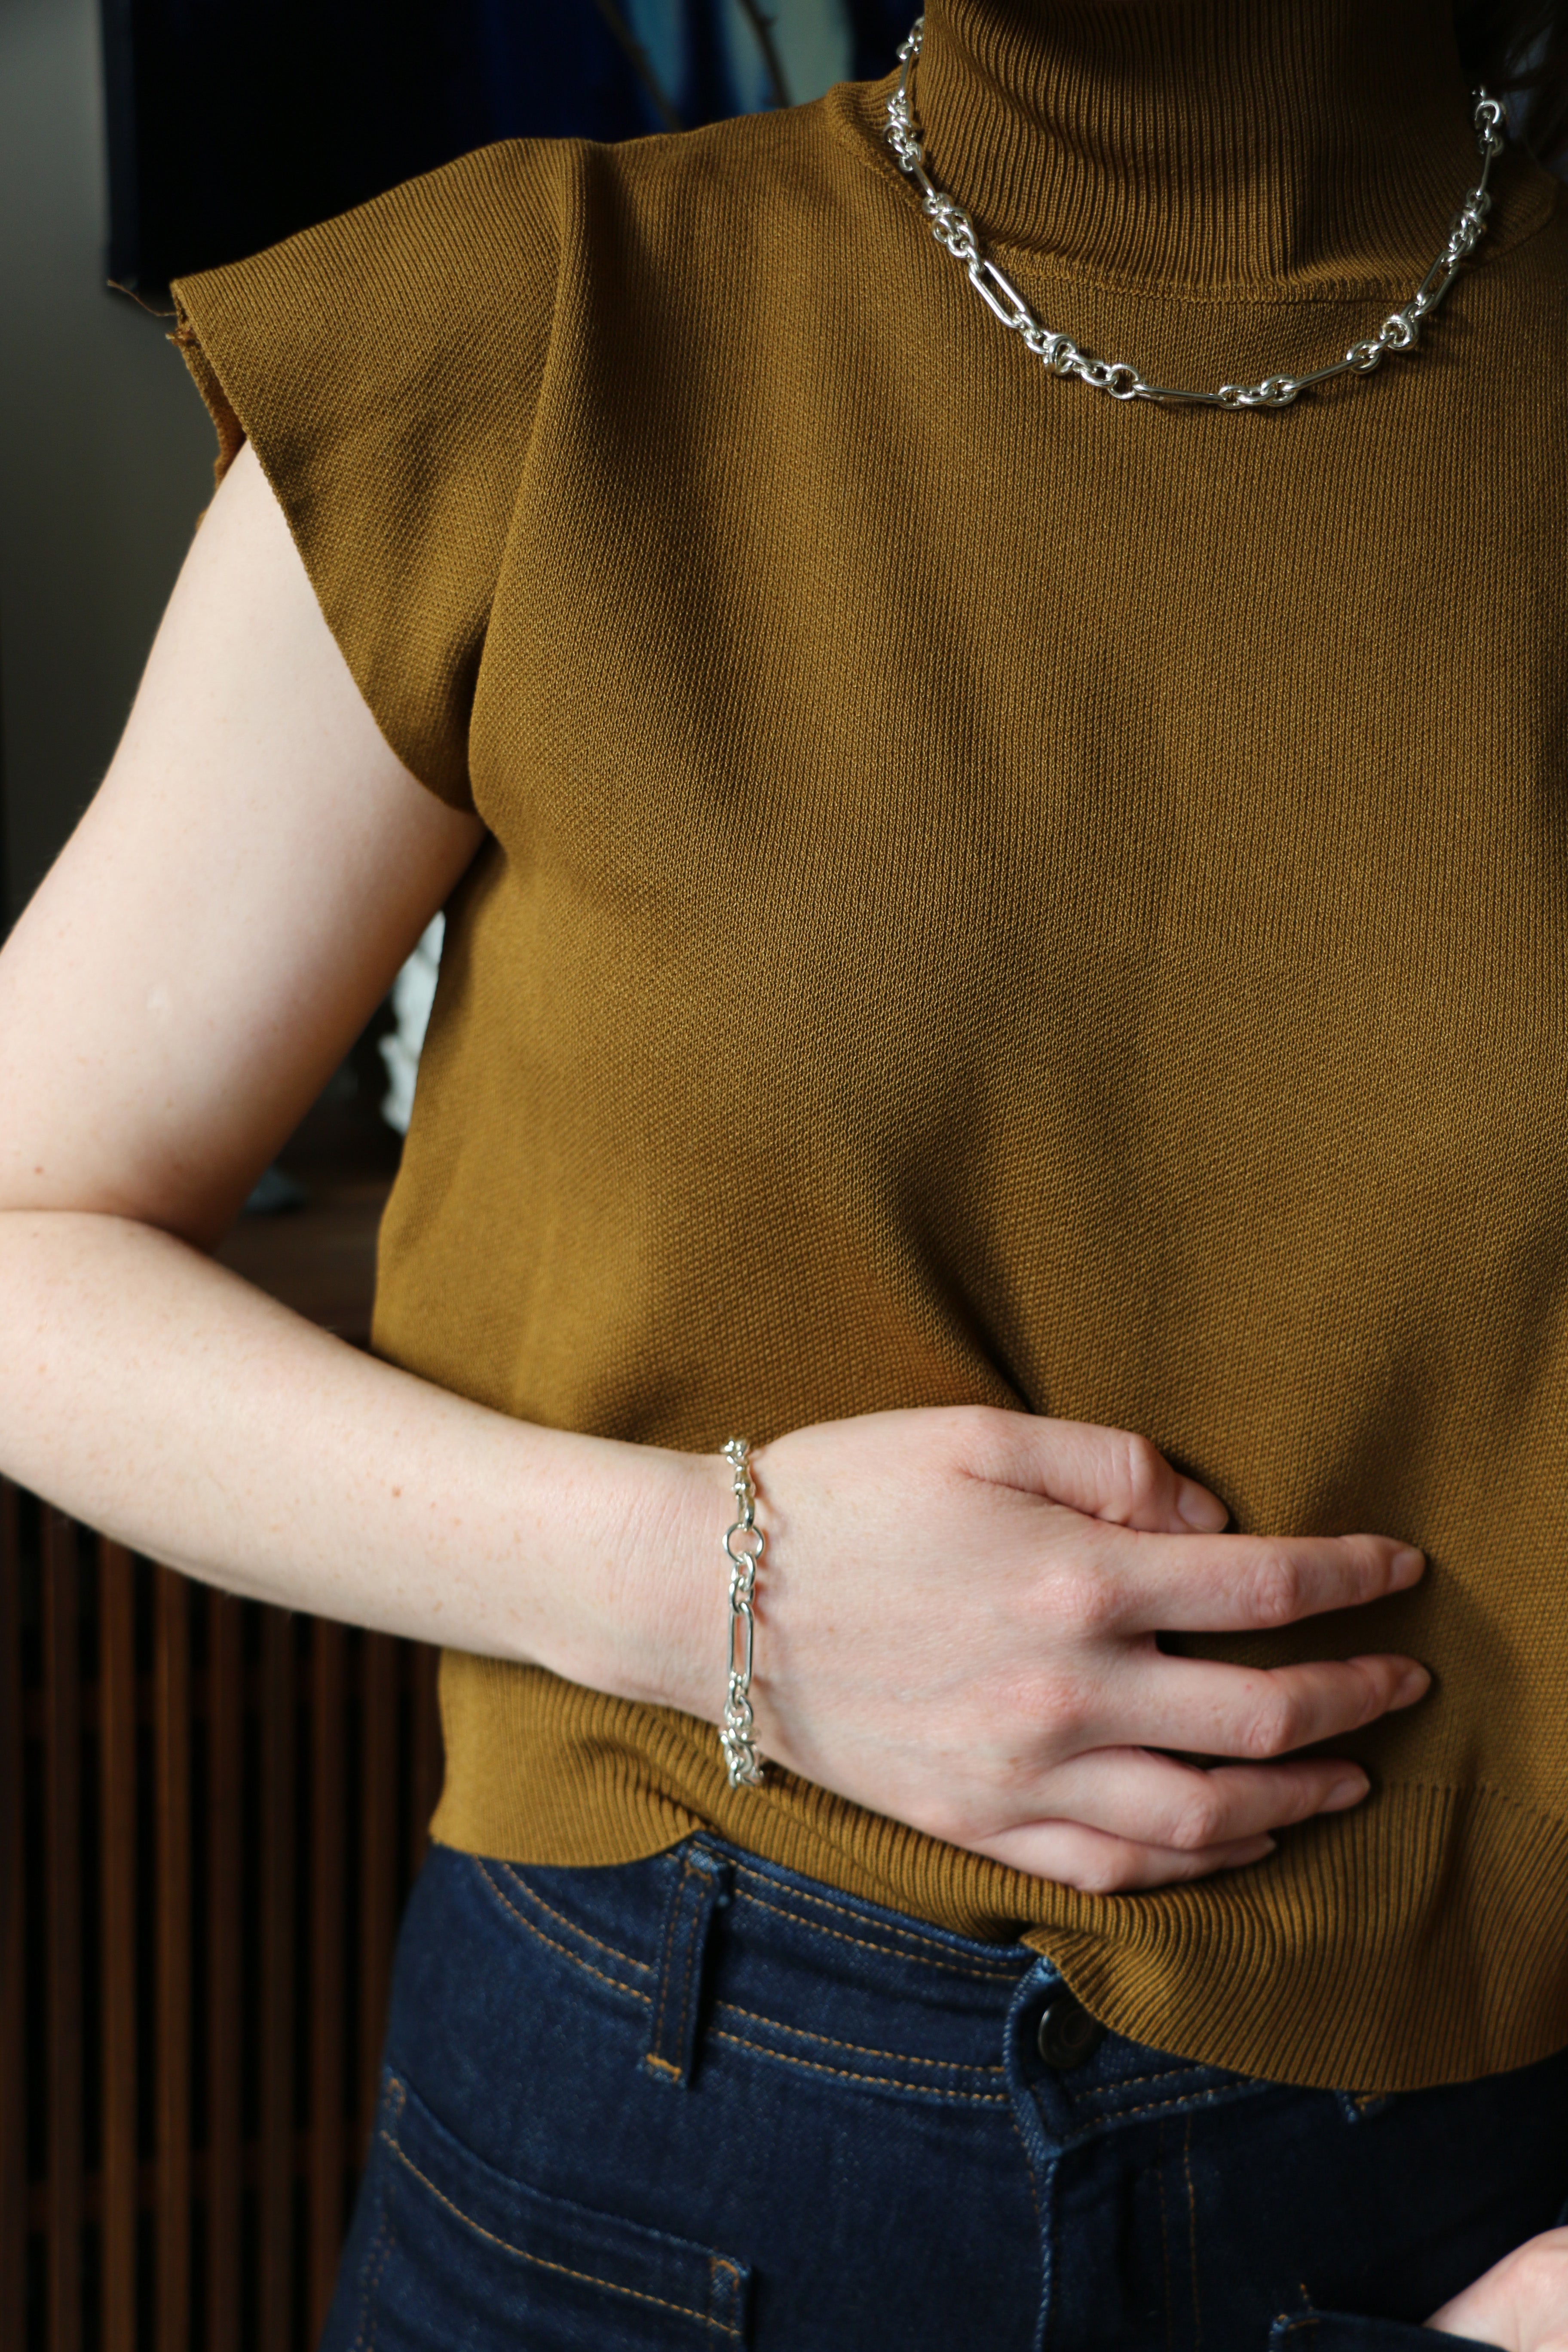 Model wearing jeans and silver Artemisia Chain bracelet and necklace with hands in her pocket